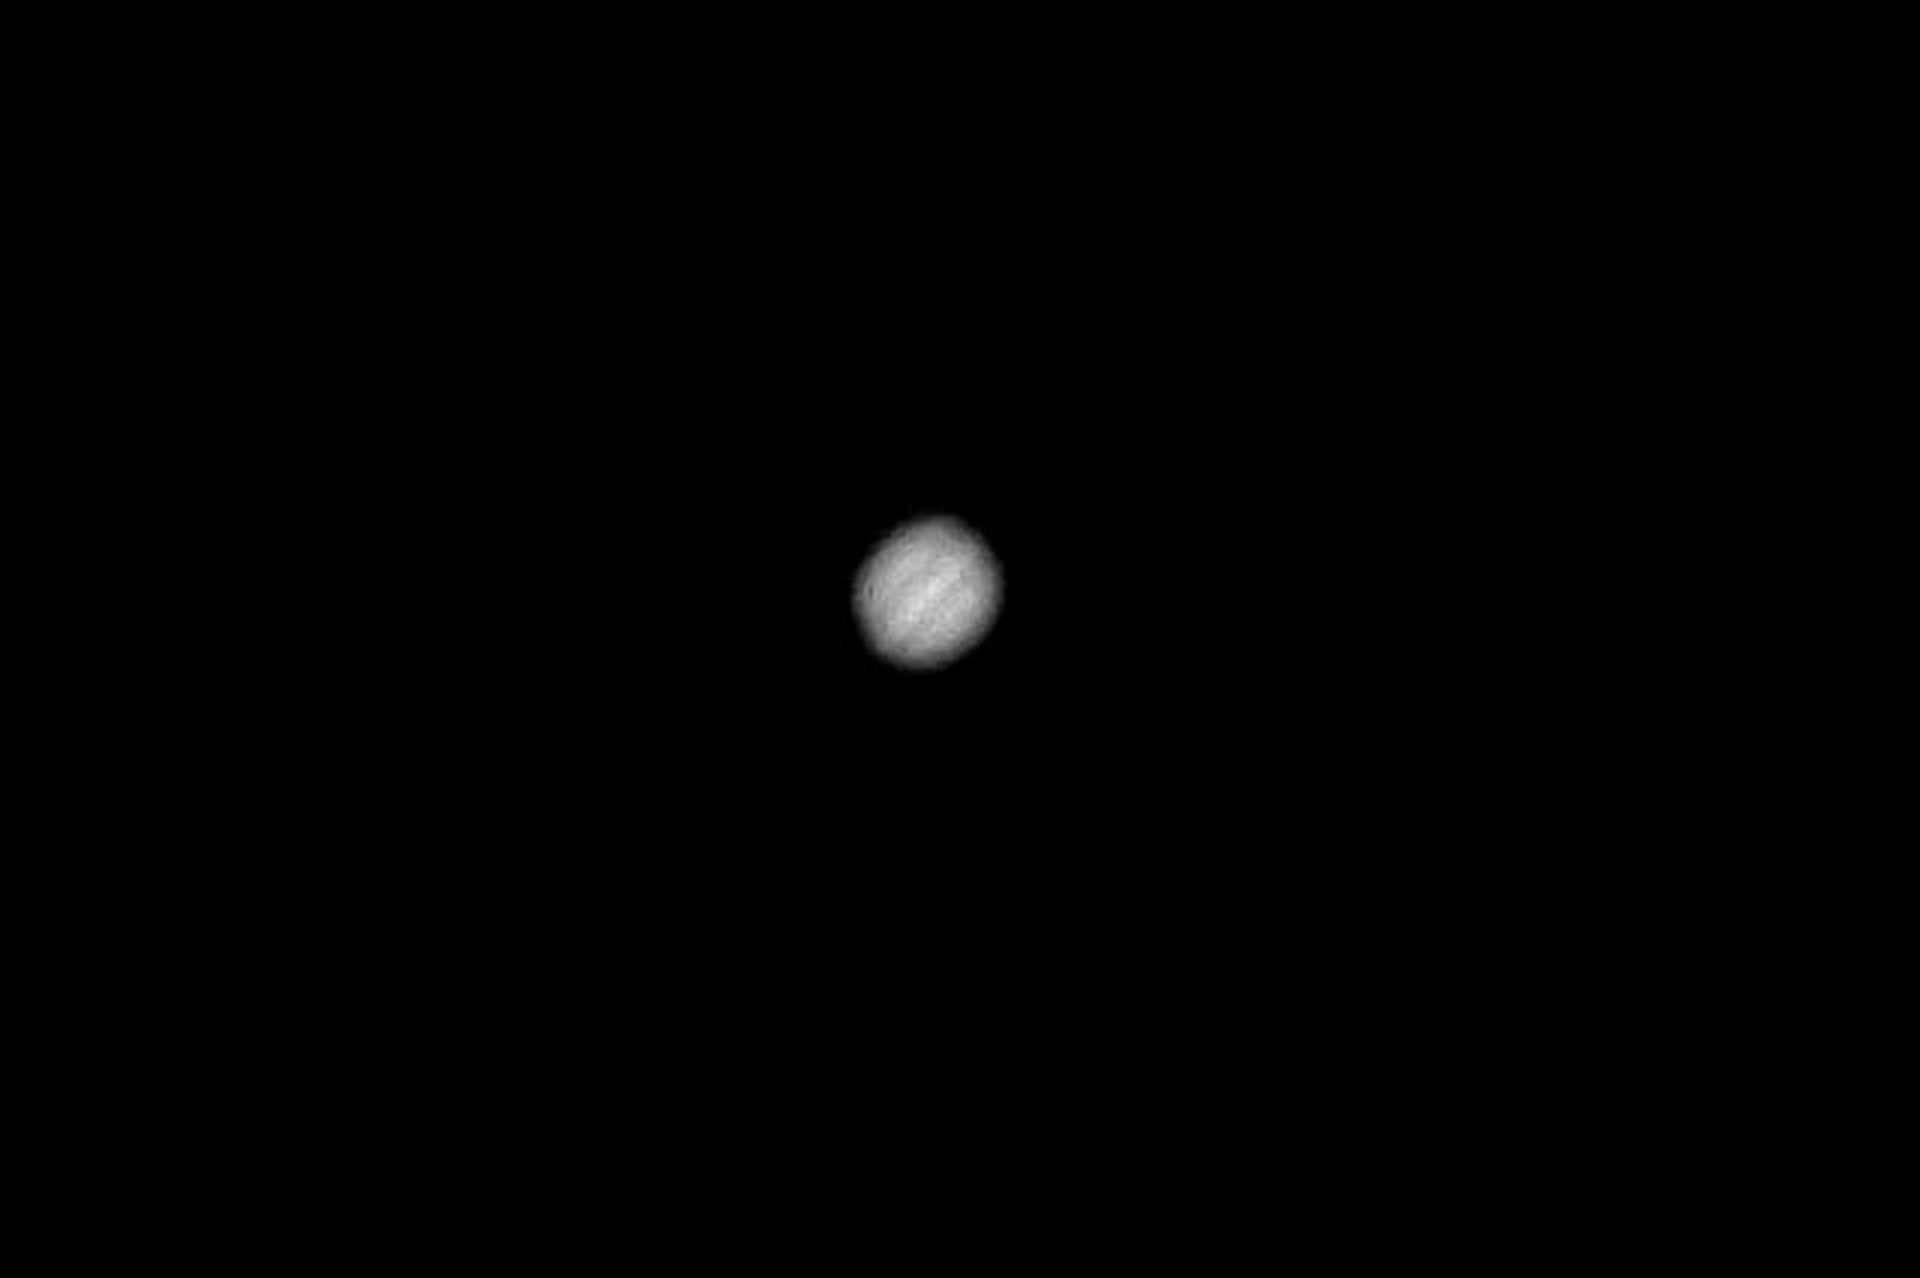 Jupiter By Bill Samson 20th March  19.35. f/4.9: 1/100sec: ISO-200 23mm focal length. “The belts are visible in this one.”-Bill